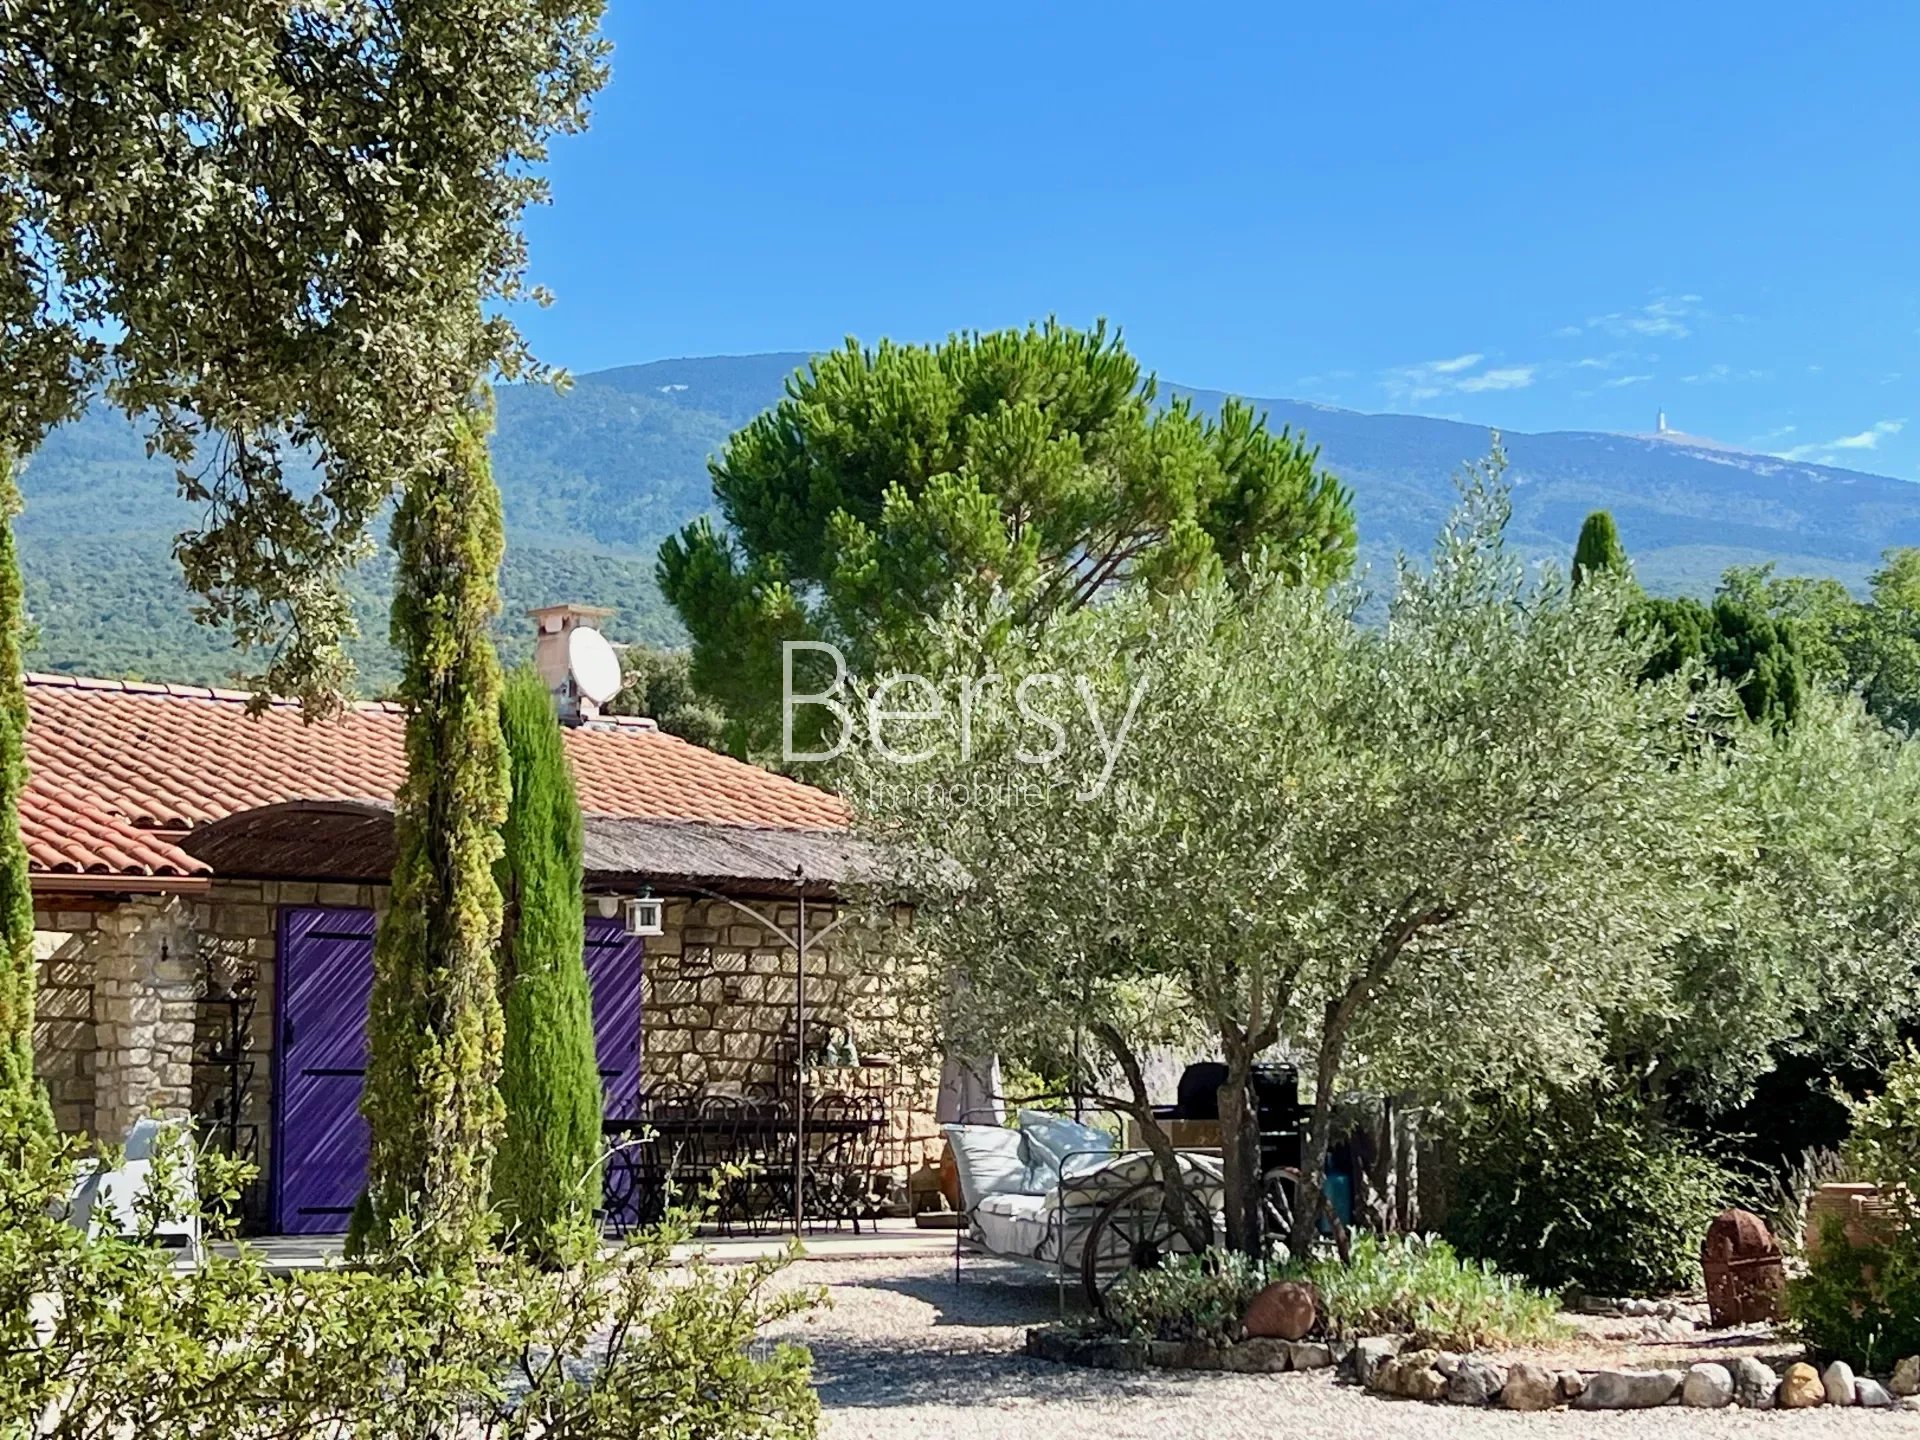 LOVERS OF VENTOUX, NATURE and the VILLAGE OF BEDOIN